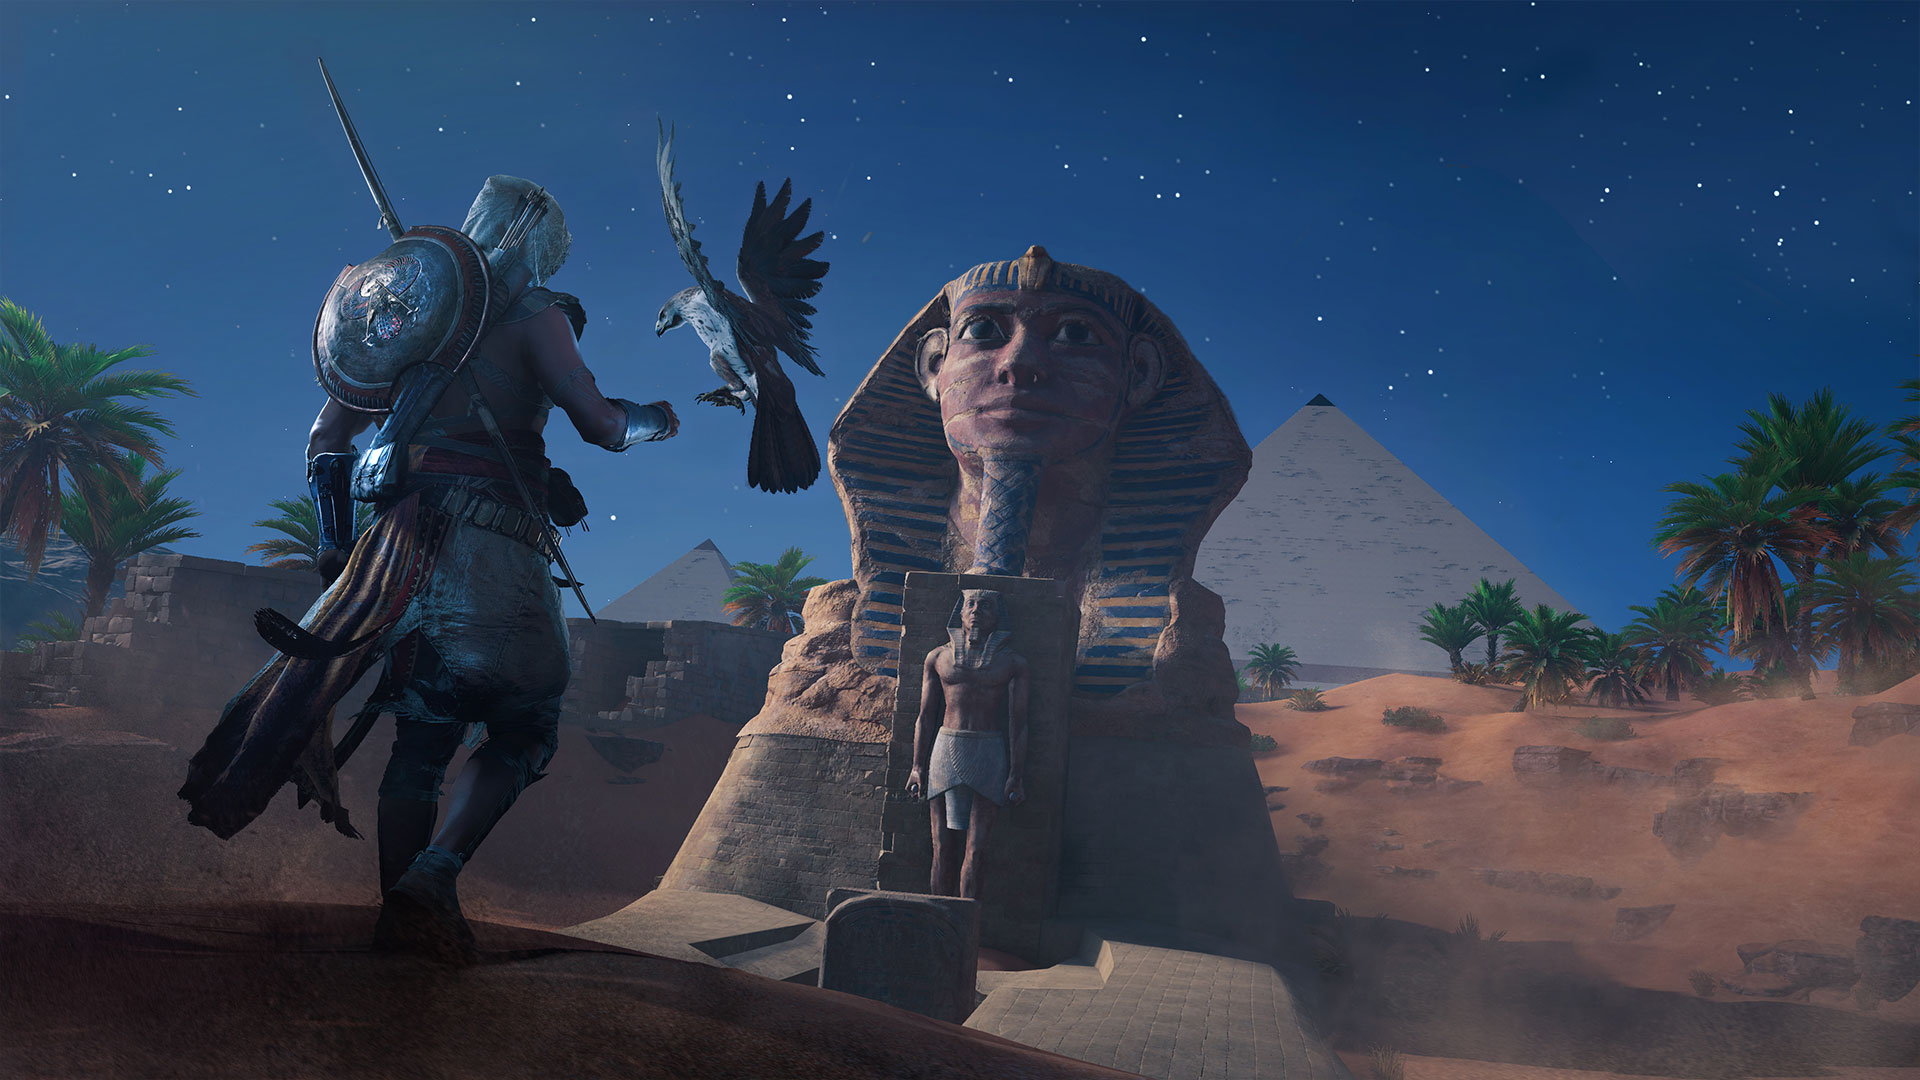 Assassin's Creed: Origins will take some getting used to, but that's a net positive